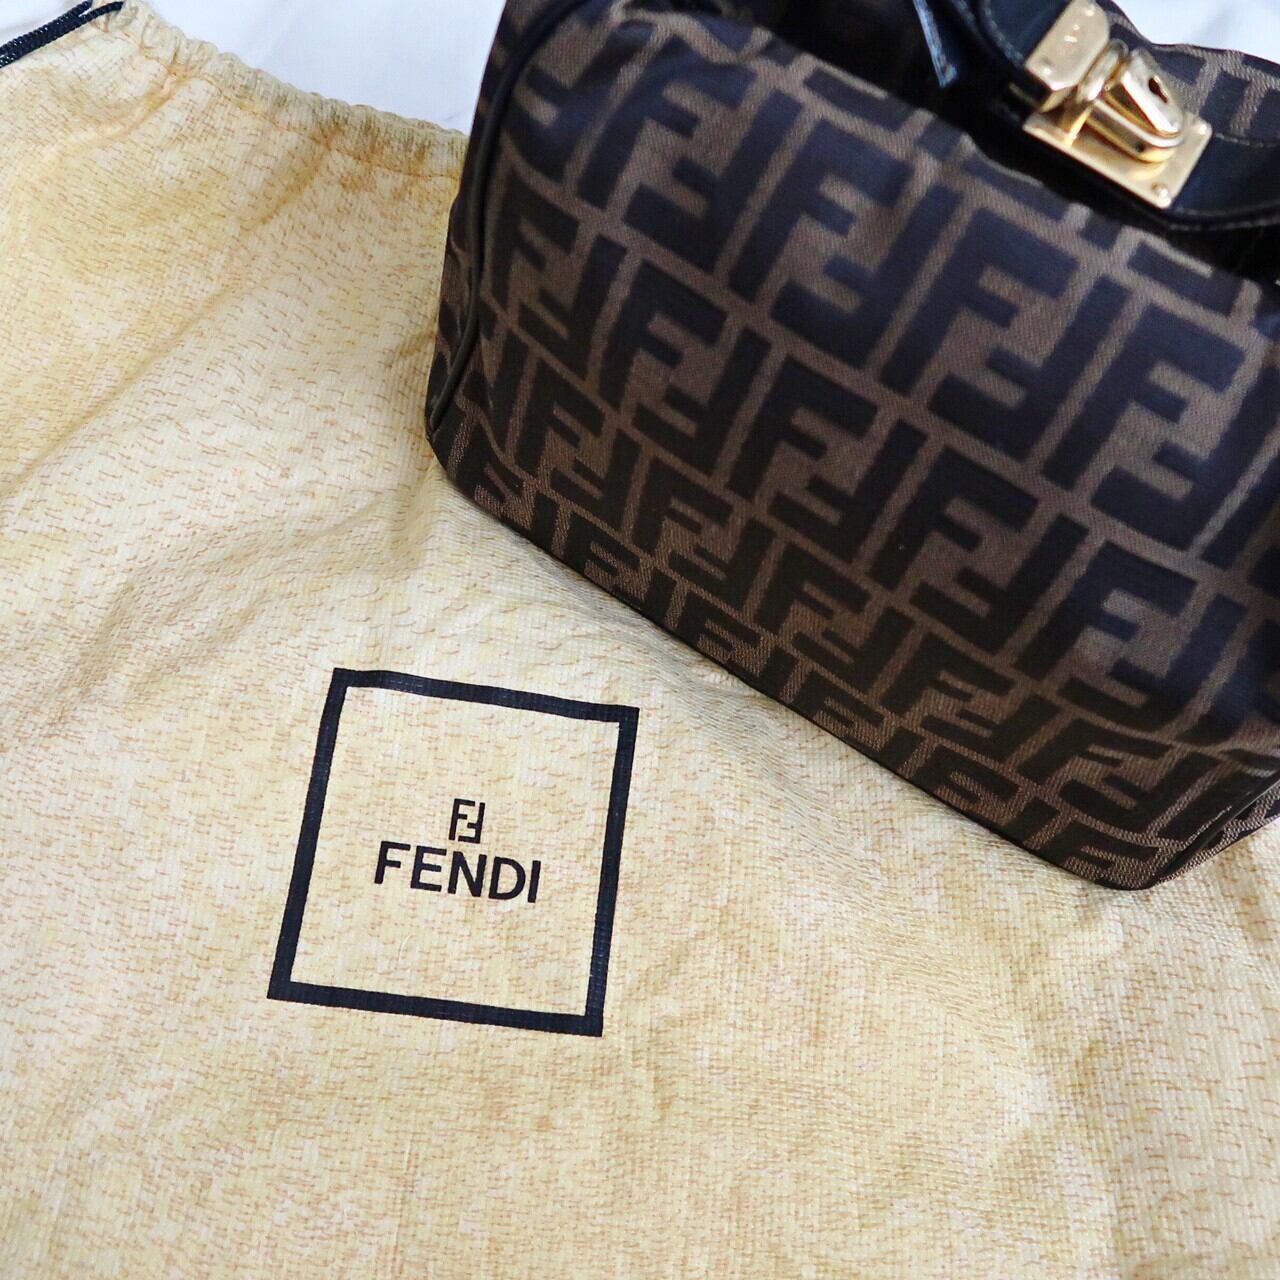 ONLY ONE【VINTAGE ACCESSORY】FENDI ズッカ柄 バニティ 